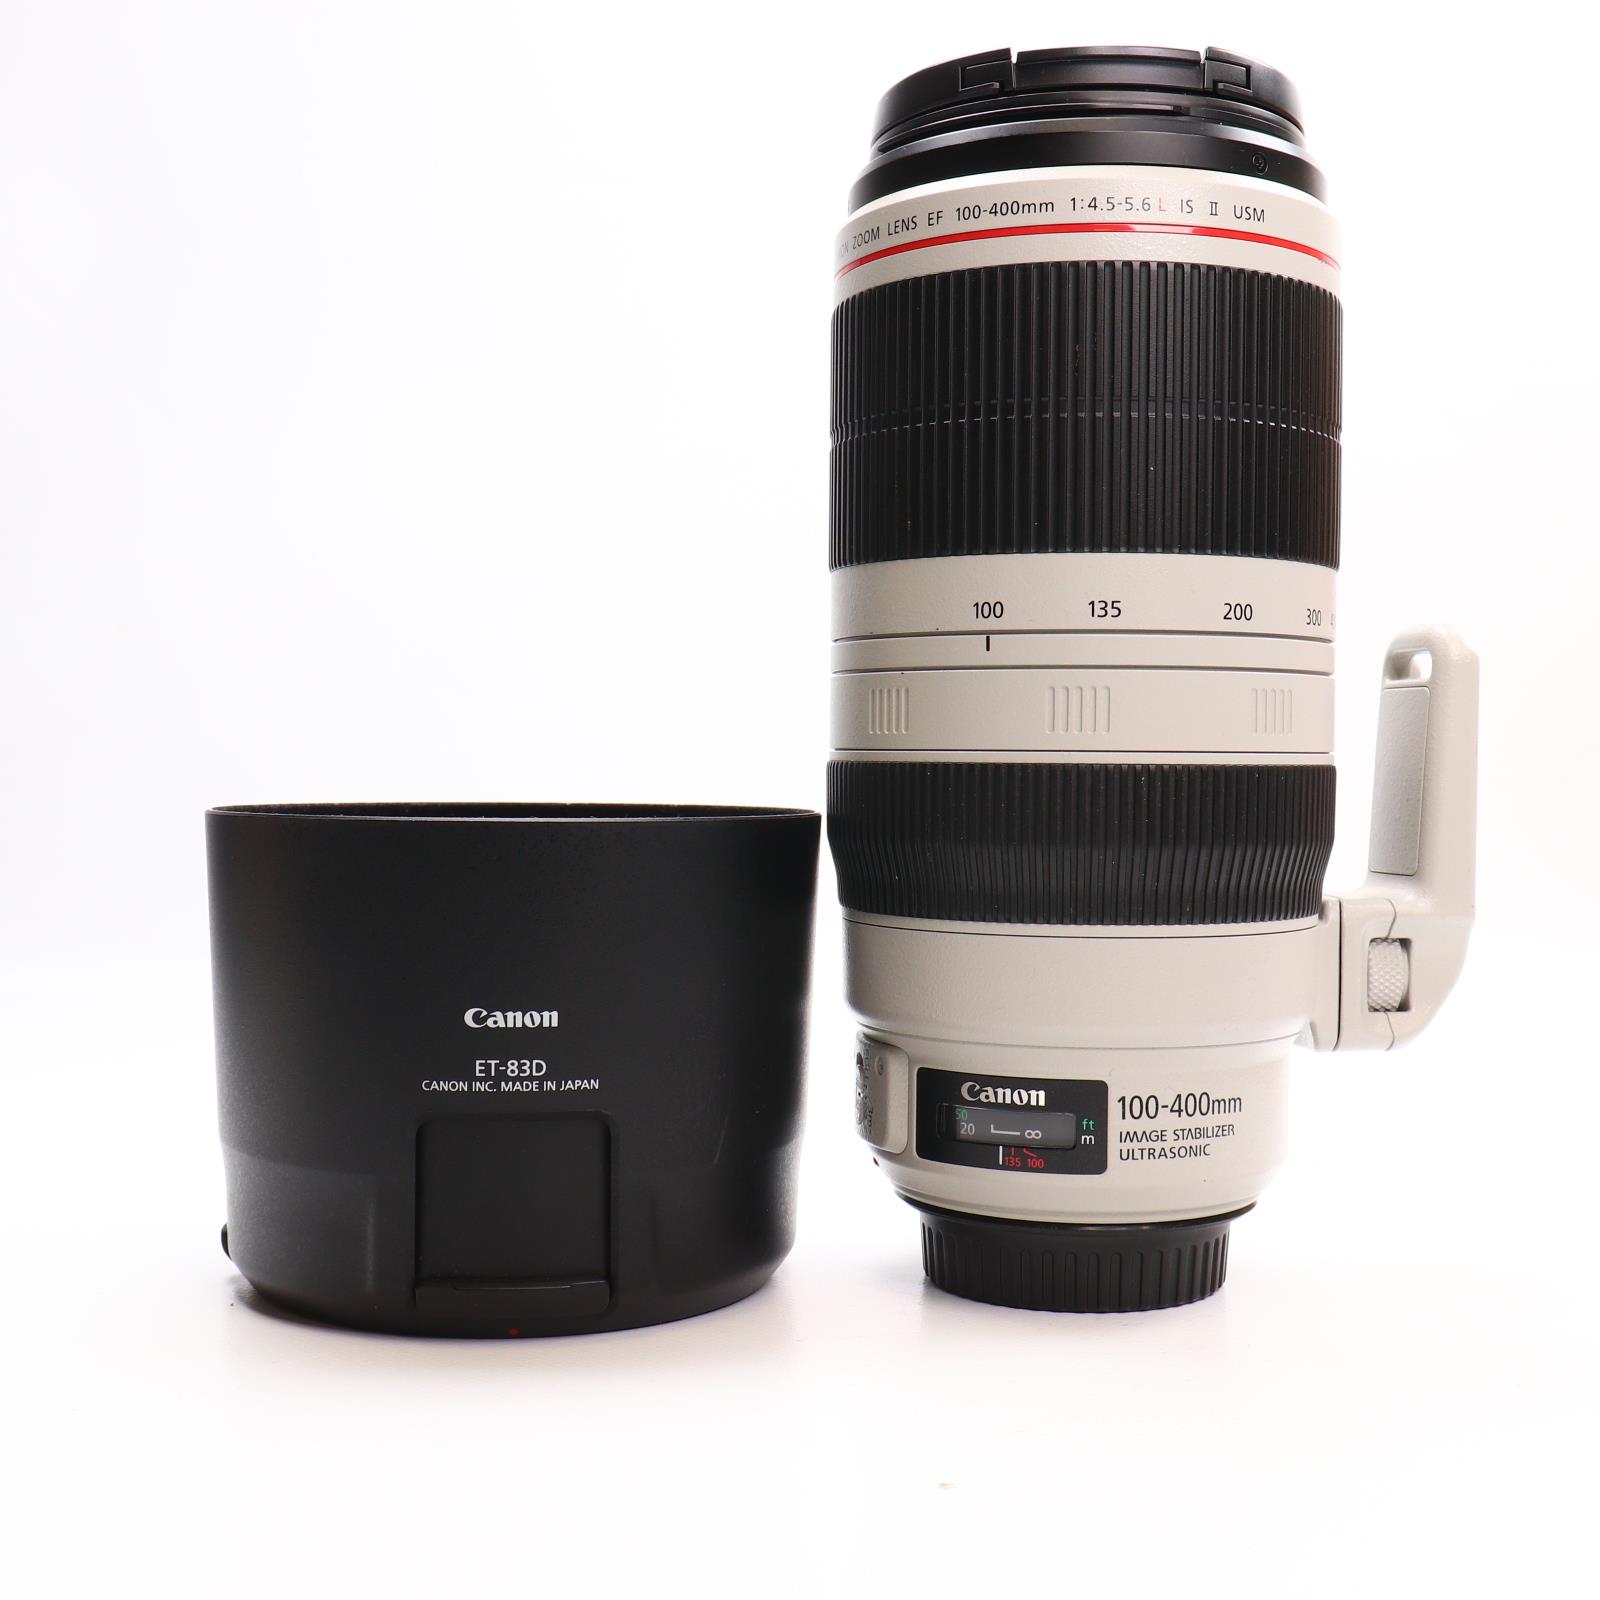 USED Canon Zoom Lens EF 100-400mm F4.5-5.6 L IS II USM | Camera 